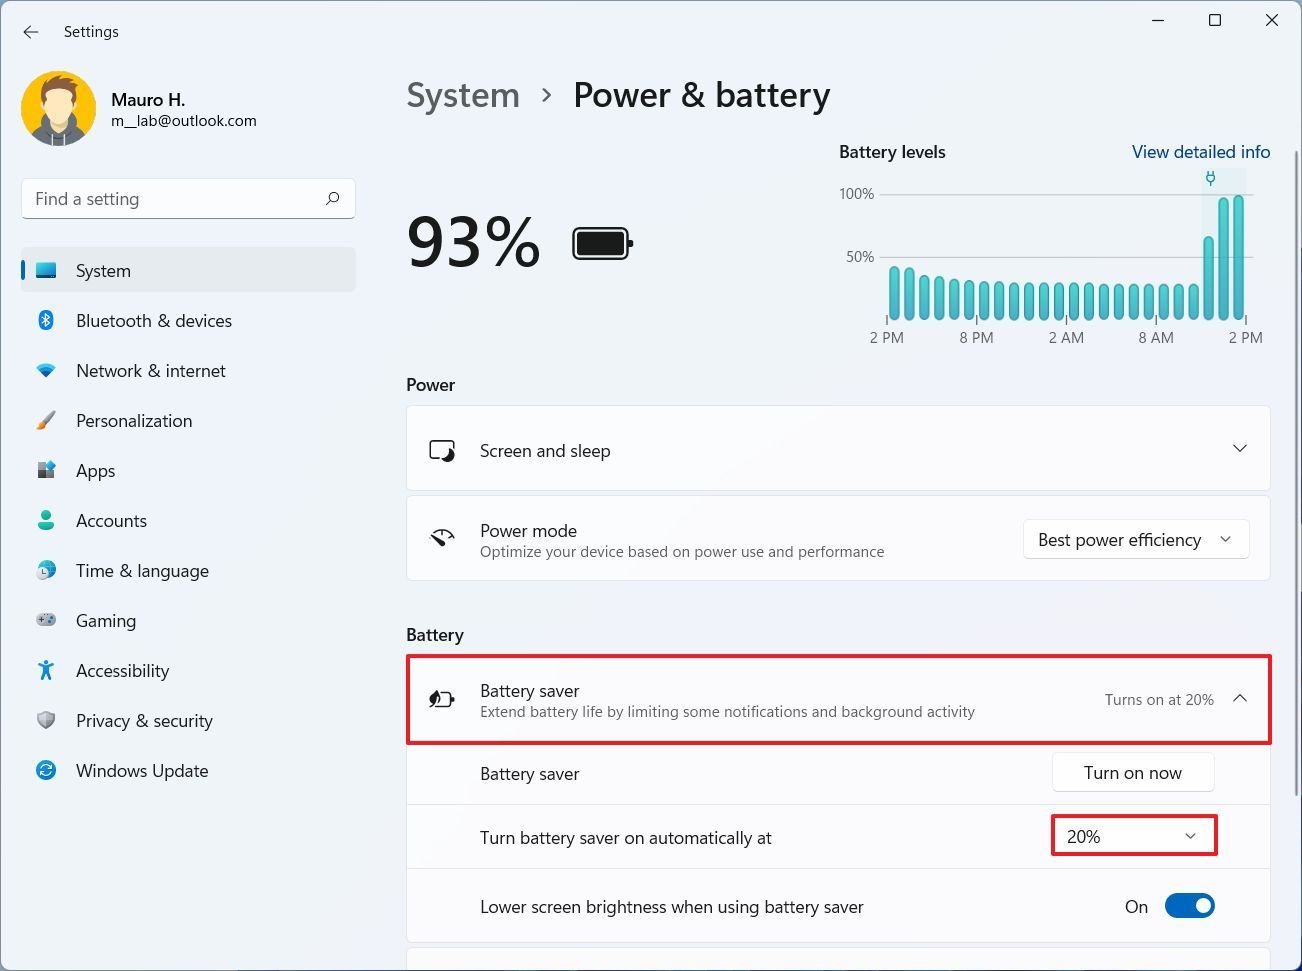 Enable battery saver automatically